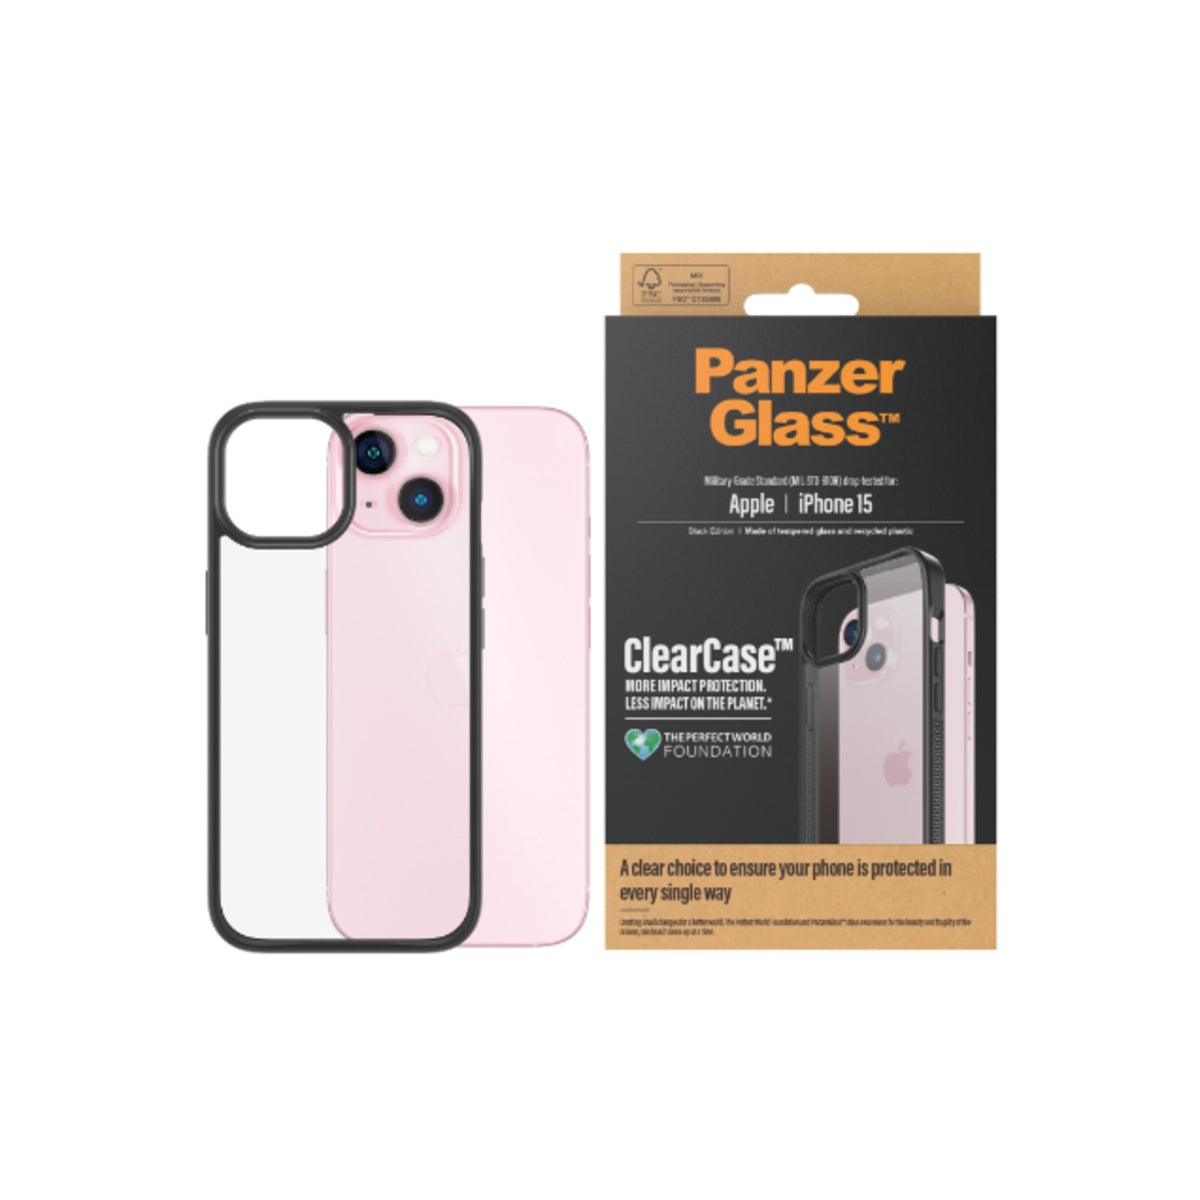 PanzerGlass Clear Case Phone Case for iPhone 15